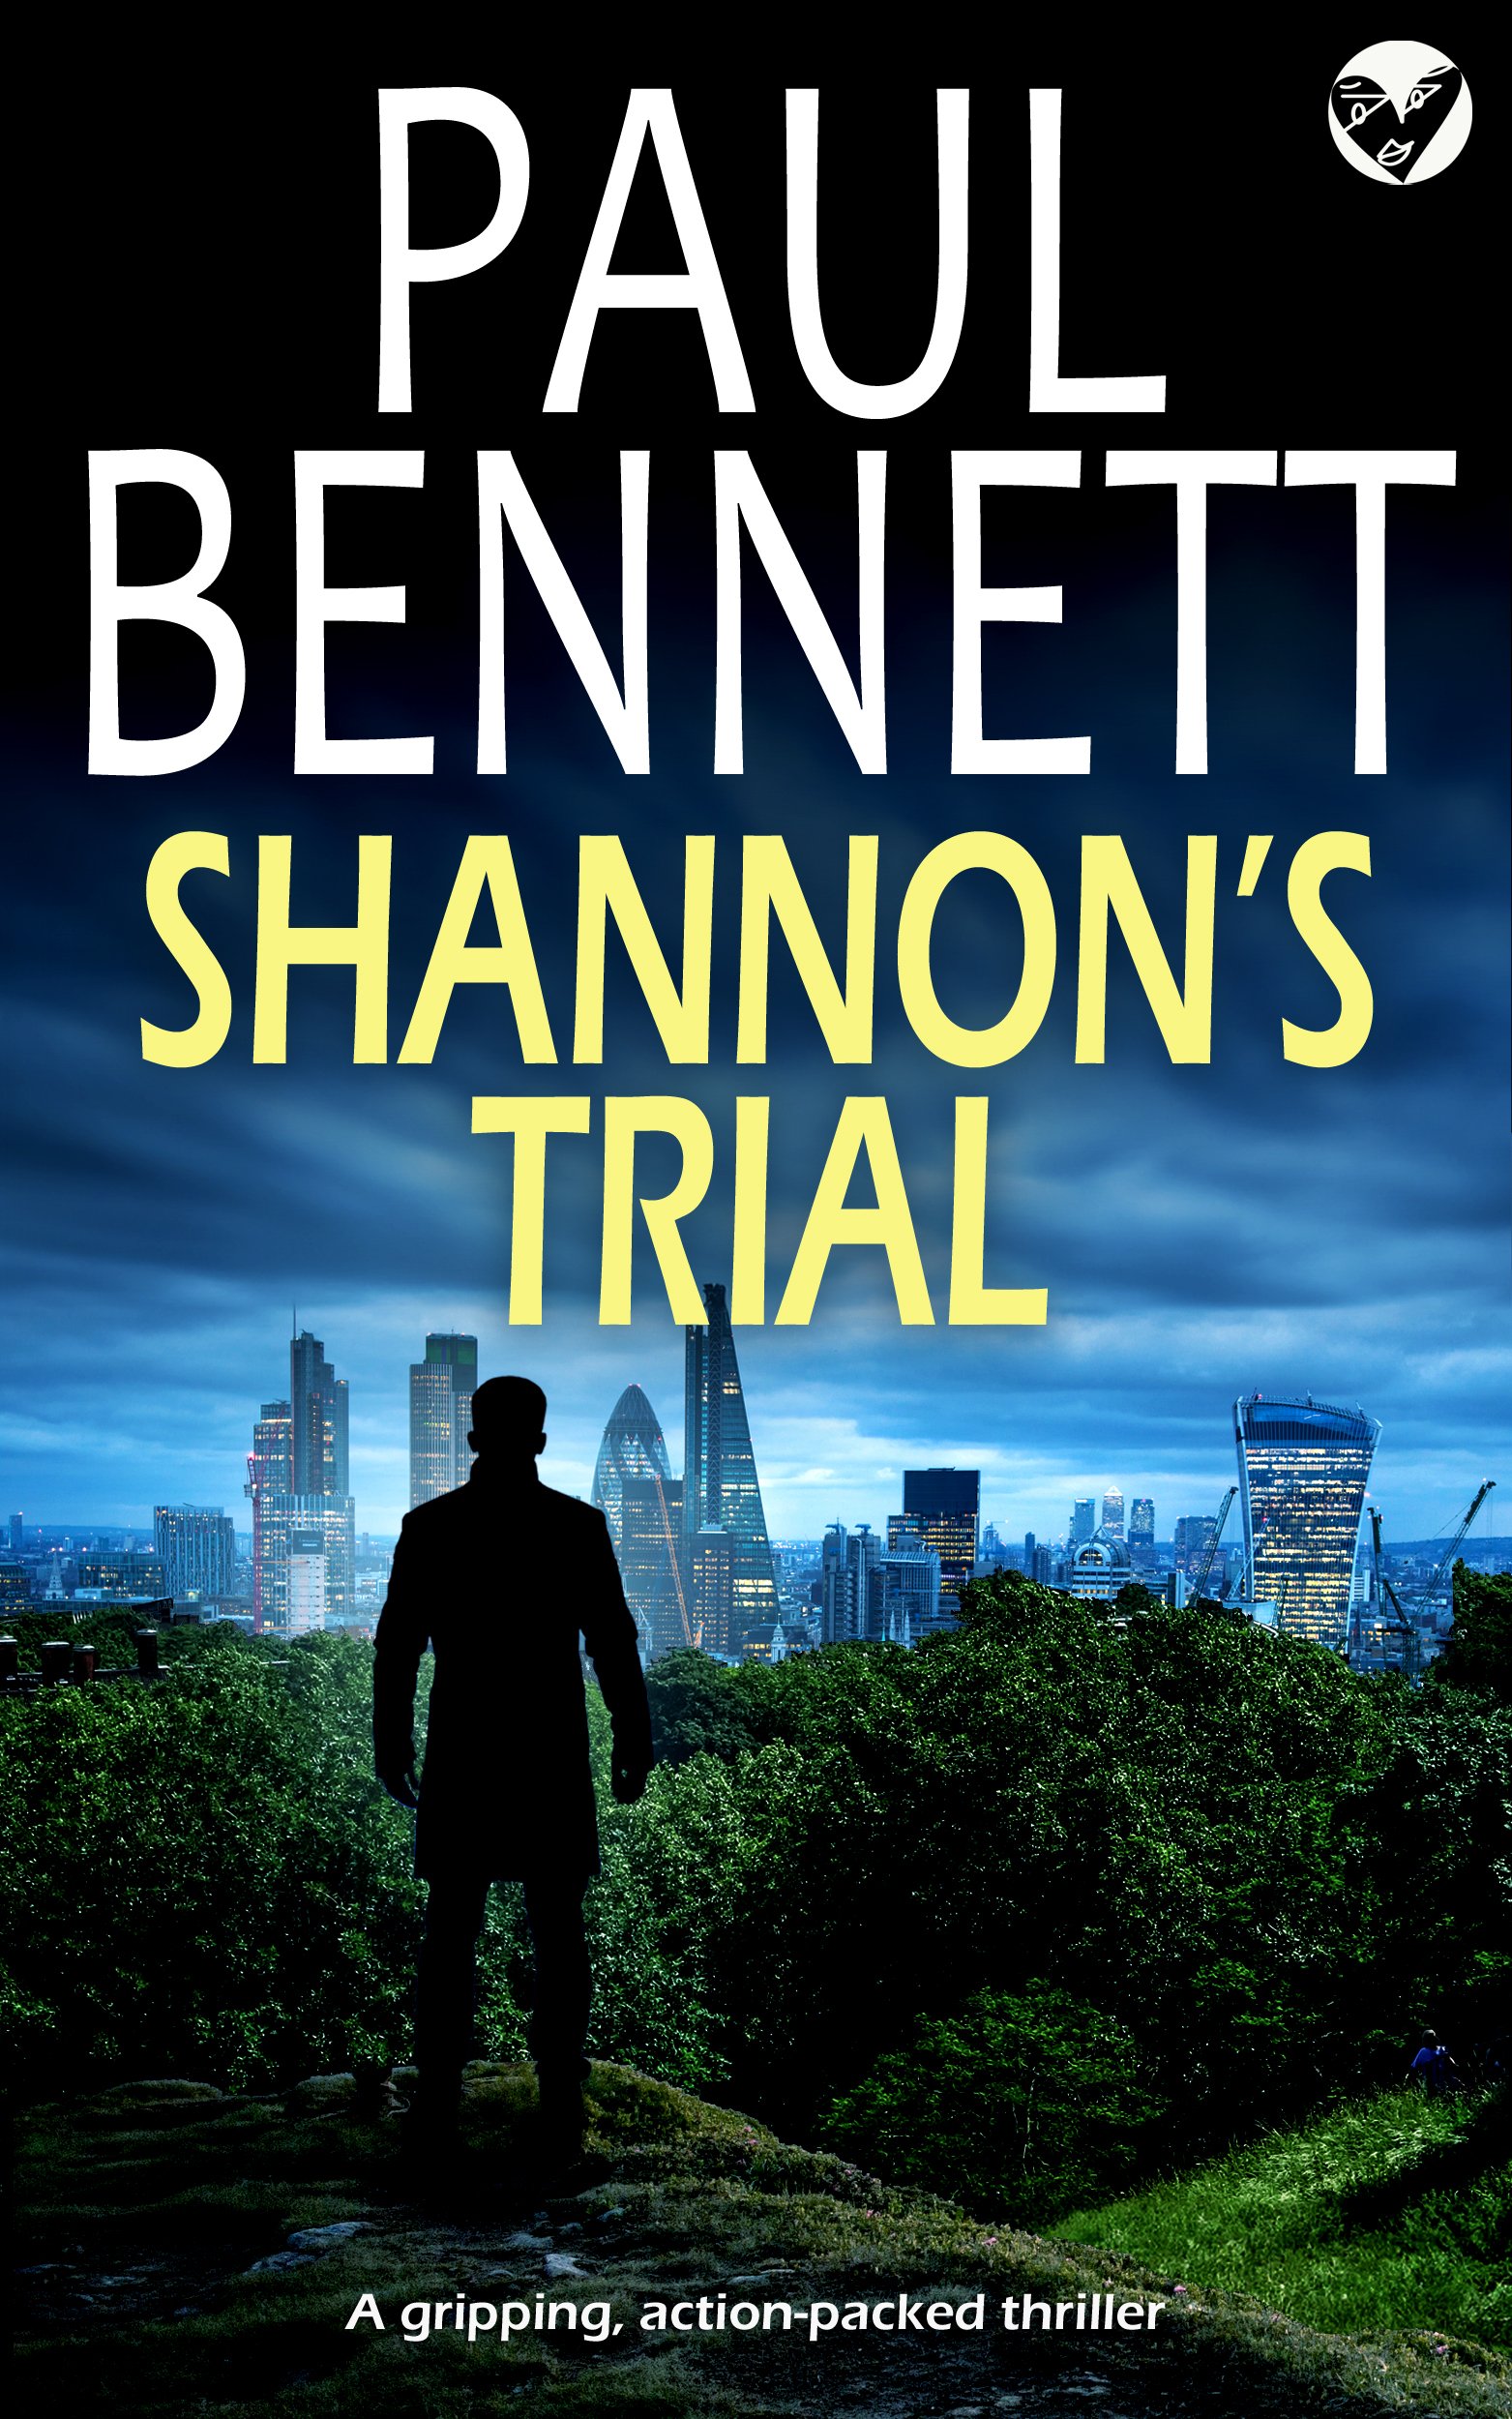 SHANNONS TRIAL Cover publish.jpg